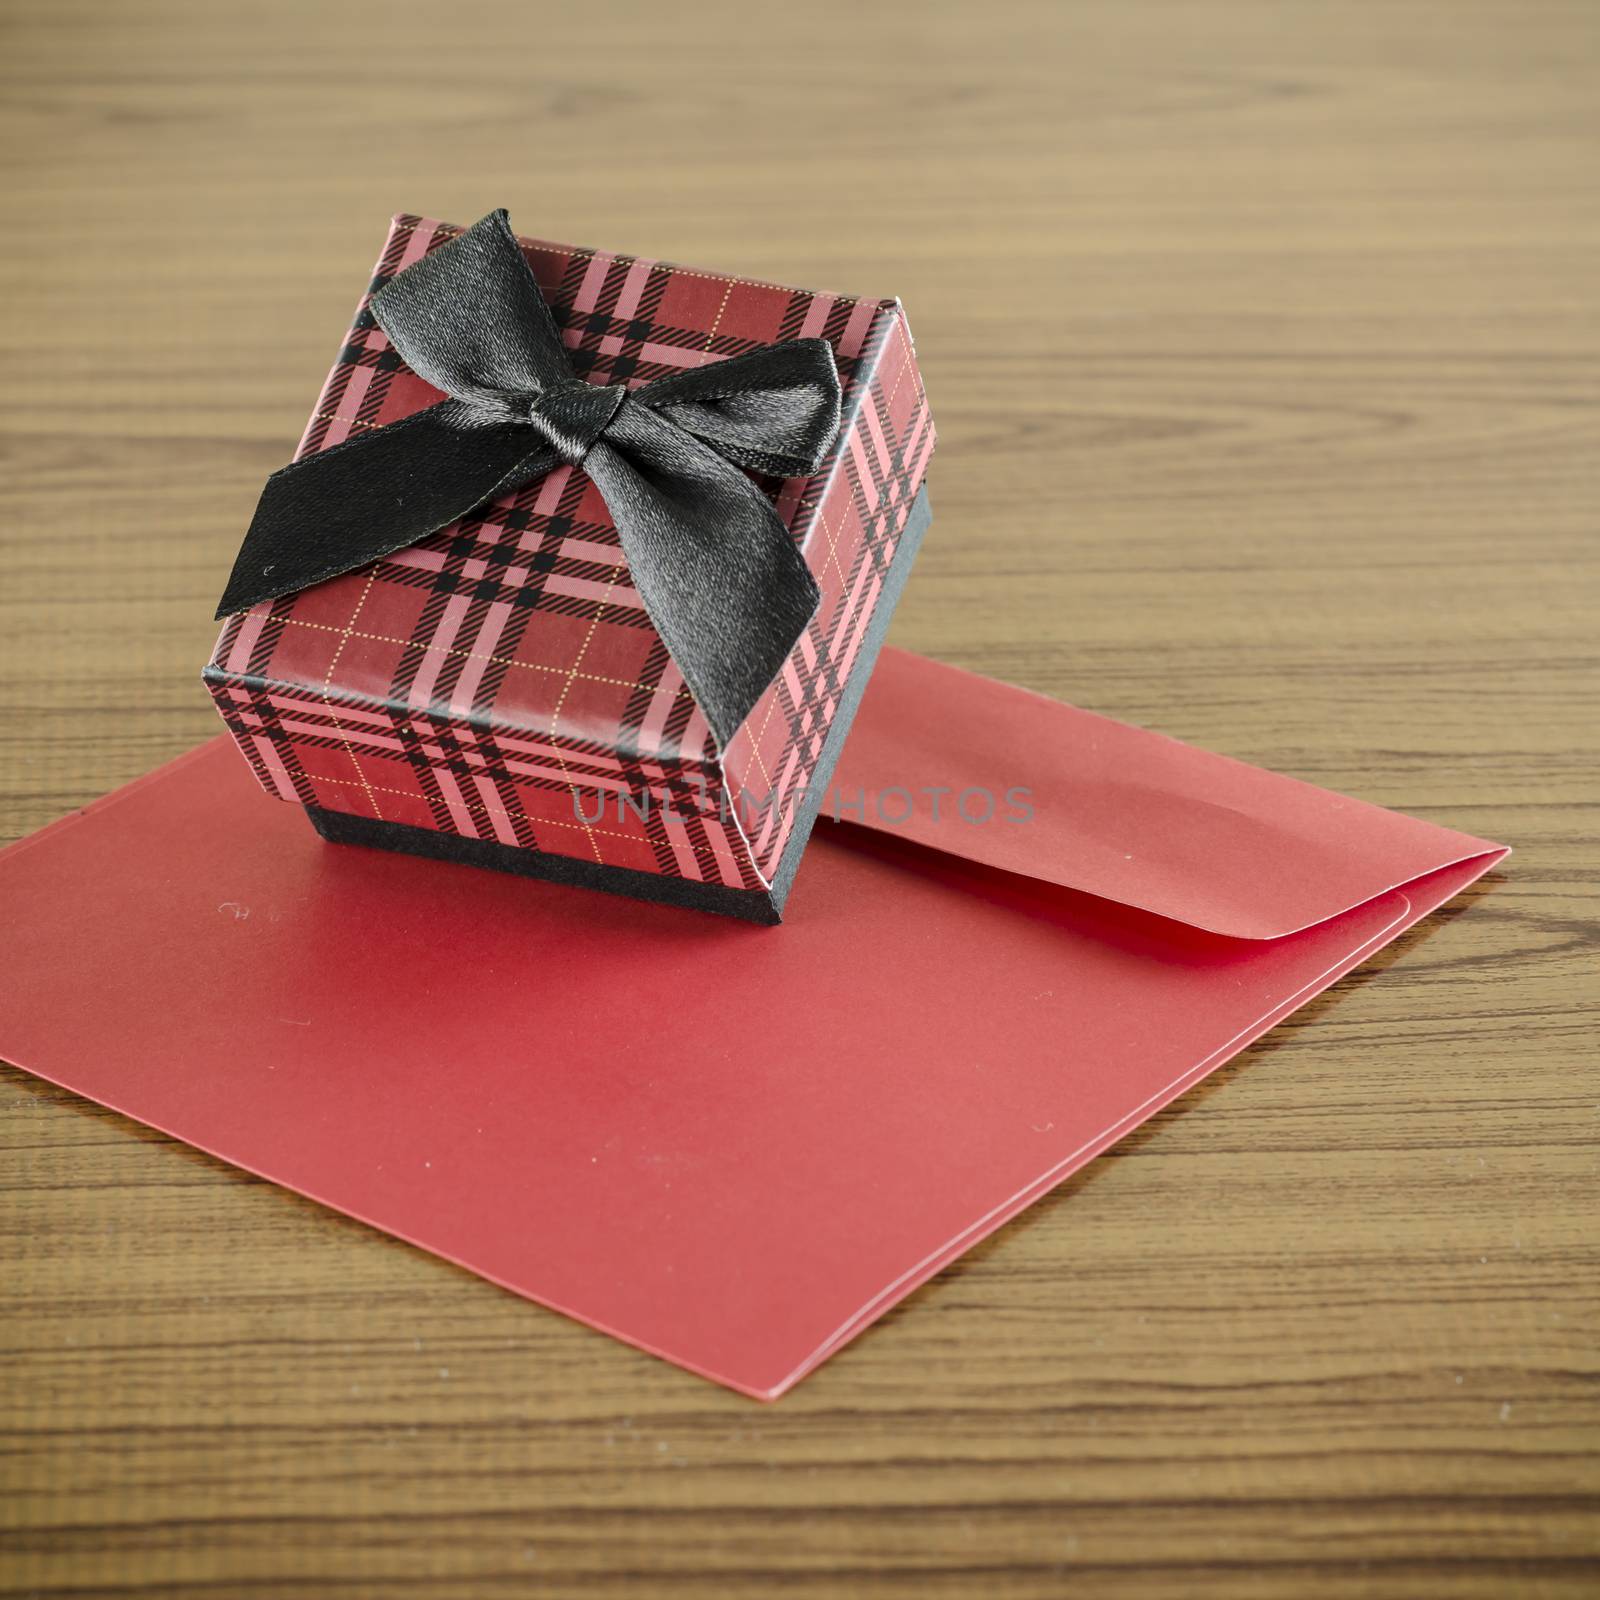 red gift box and envelope by ammza12